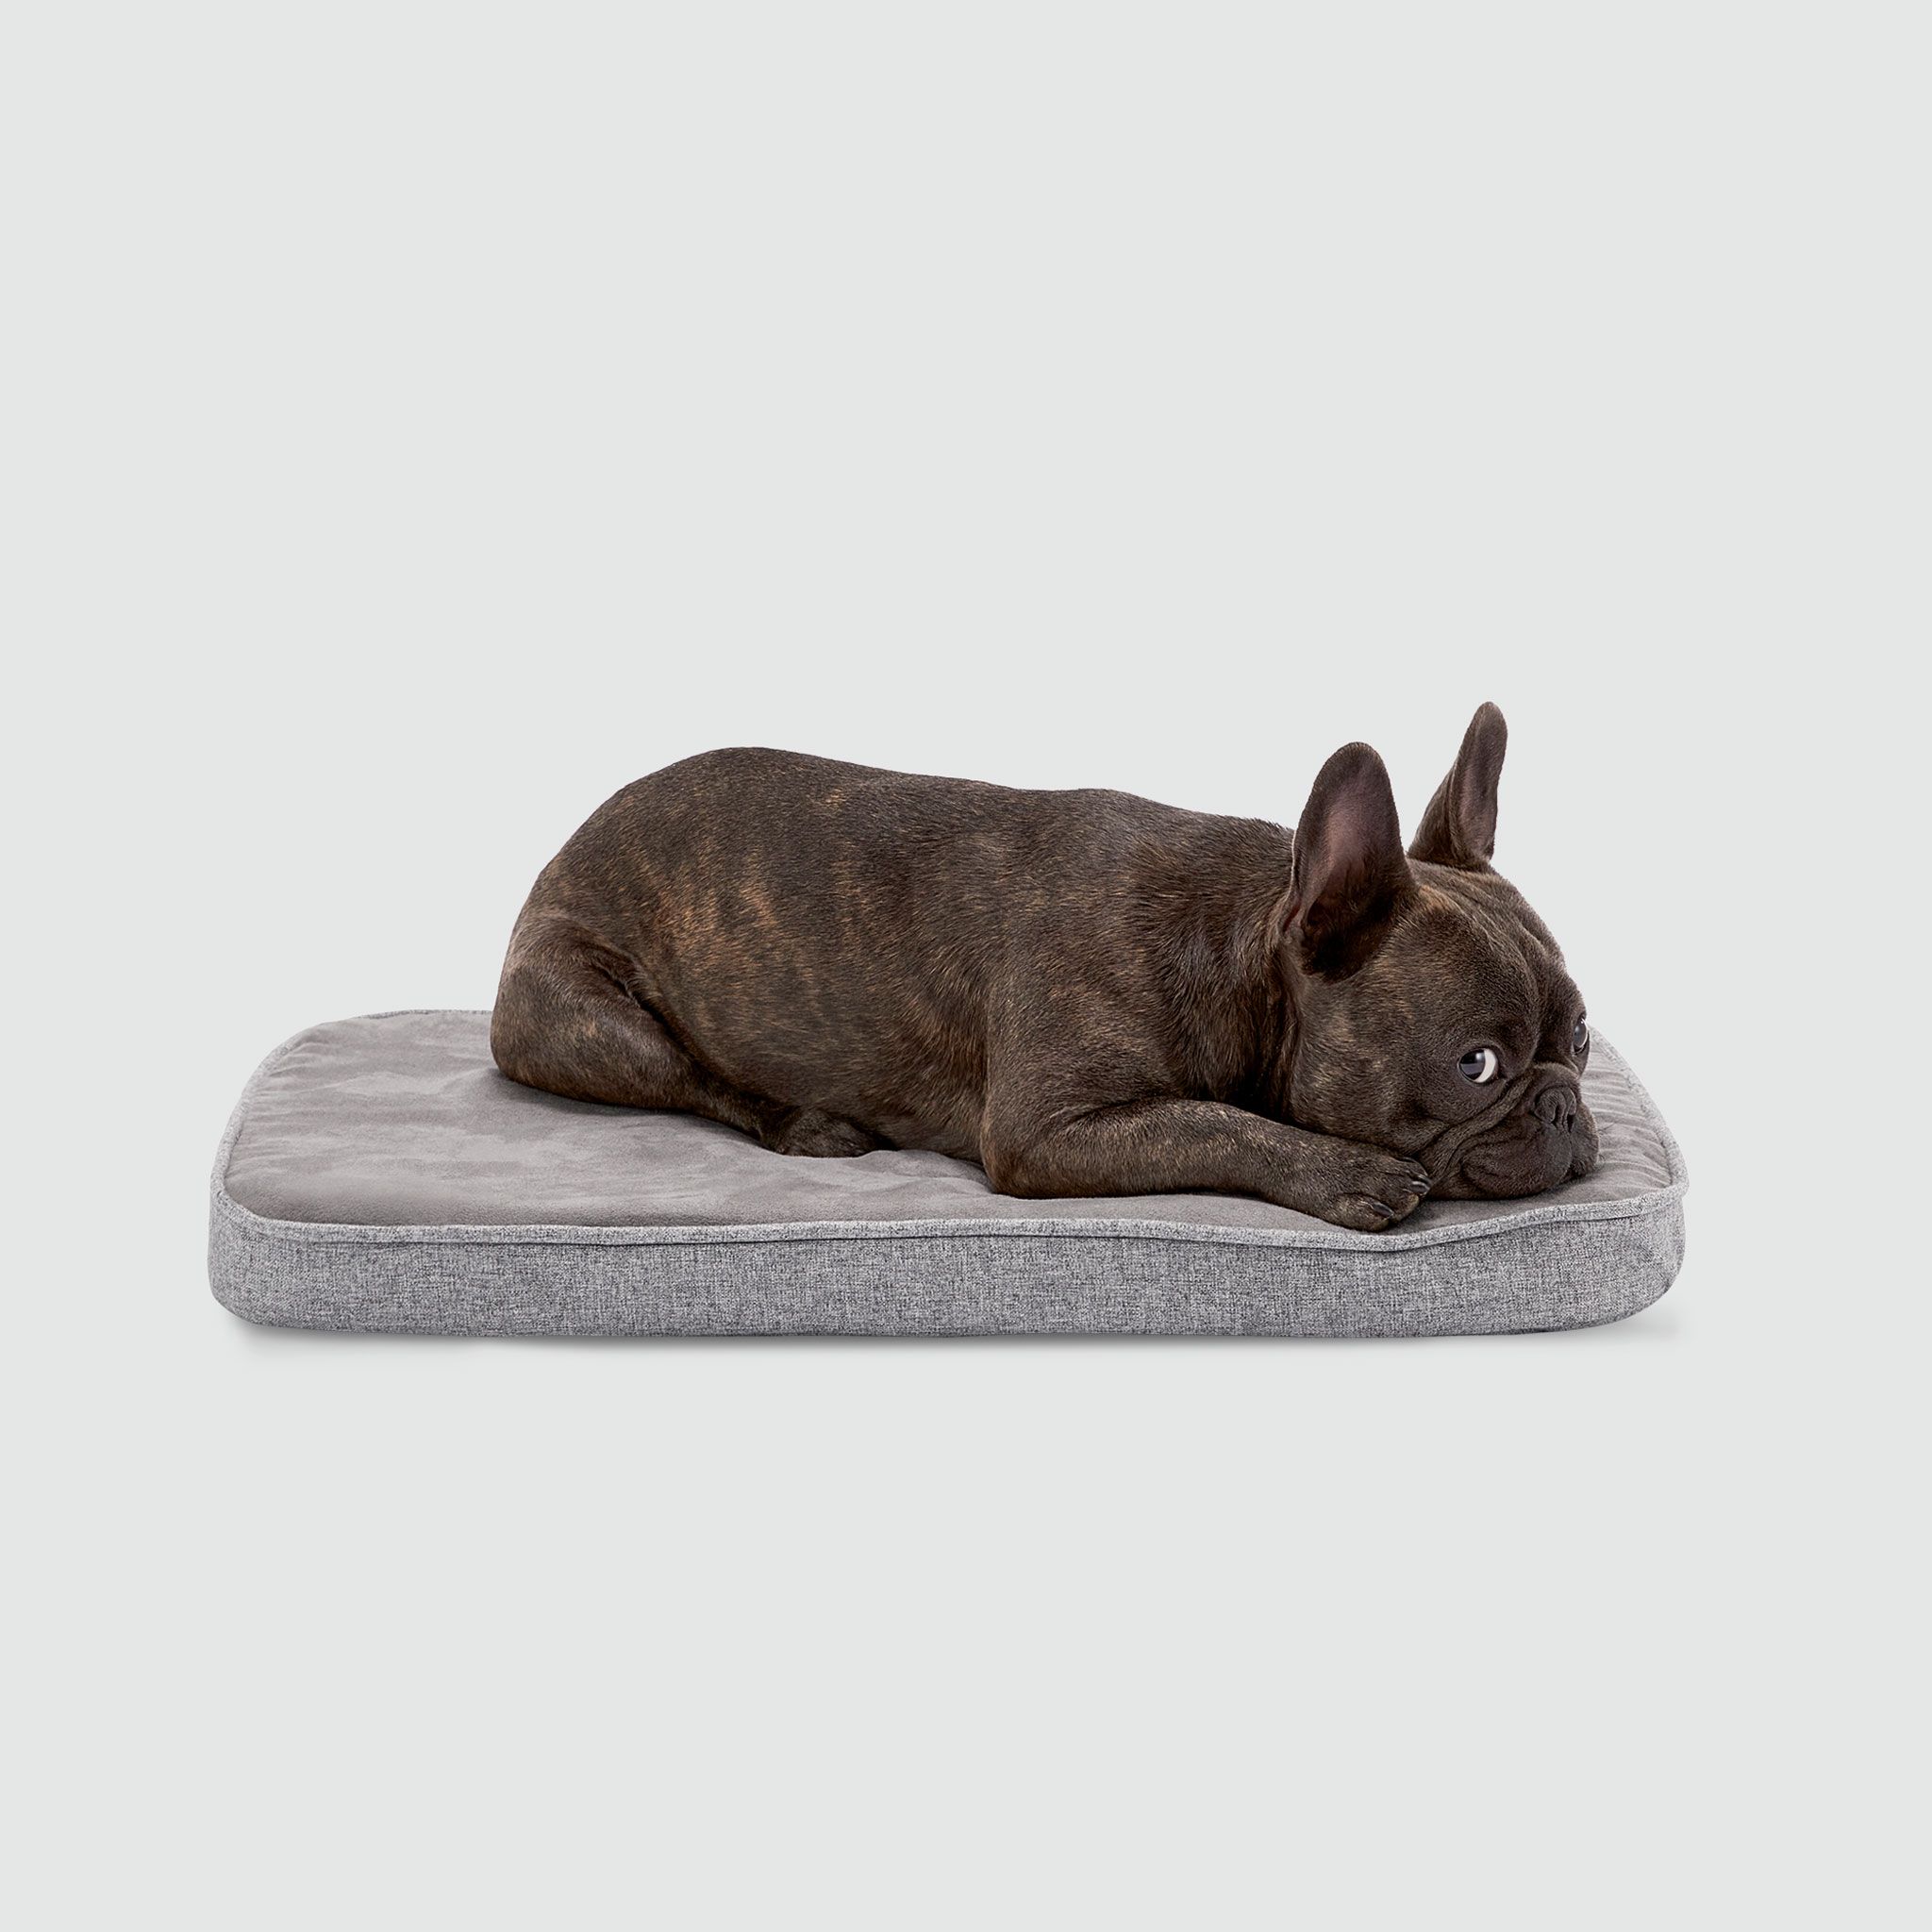 A brown dog laying on top of a dog bed